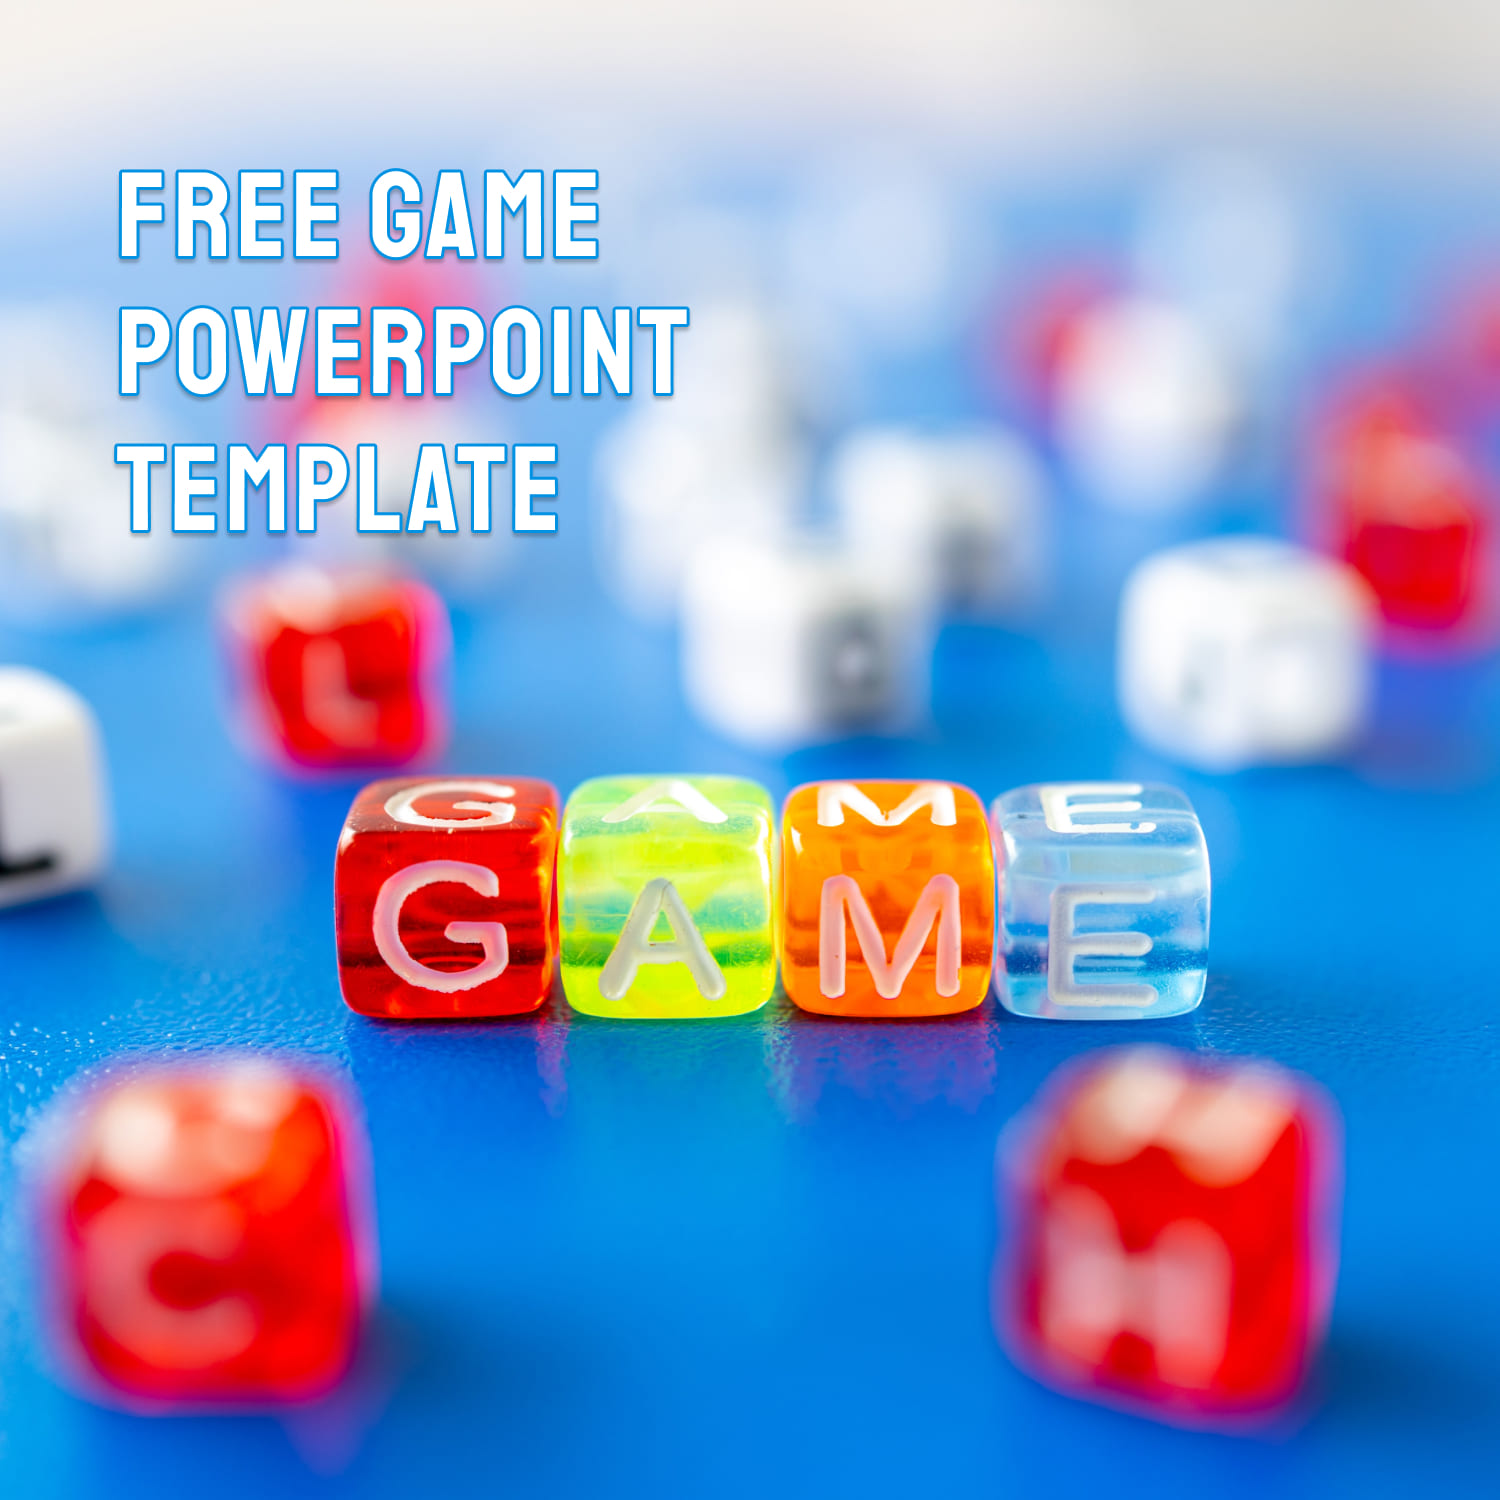 Free game powerpoint template - main image preview.